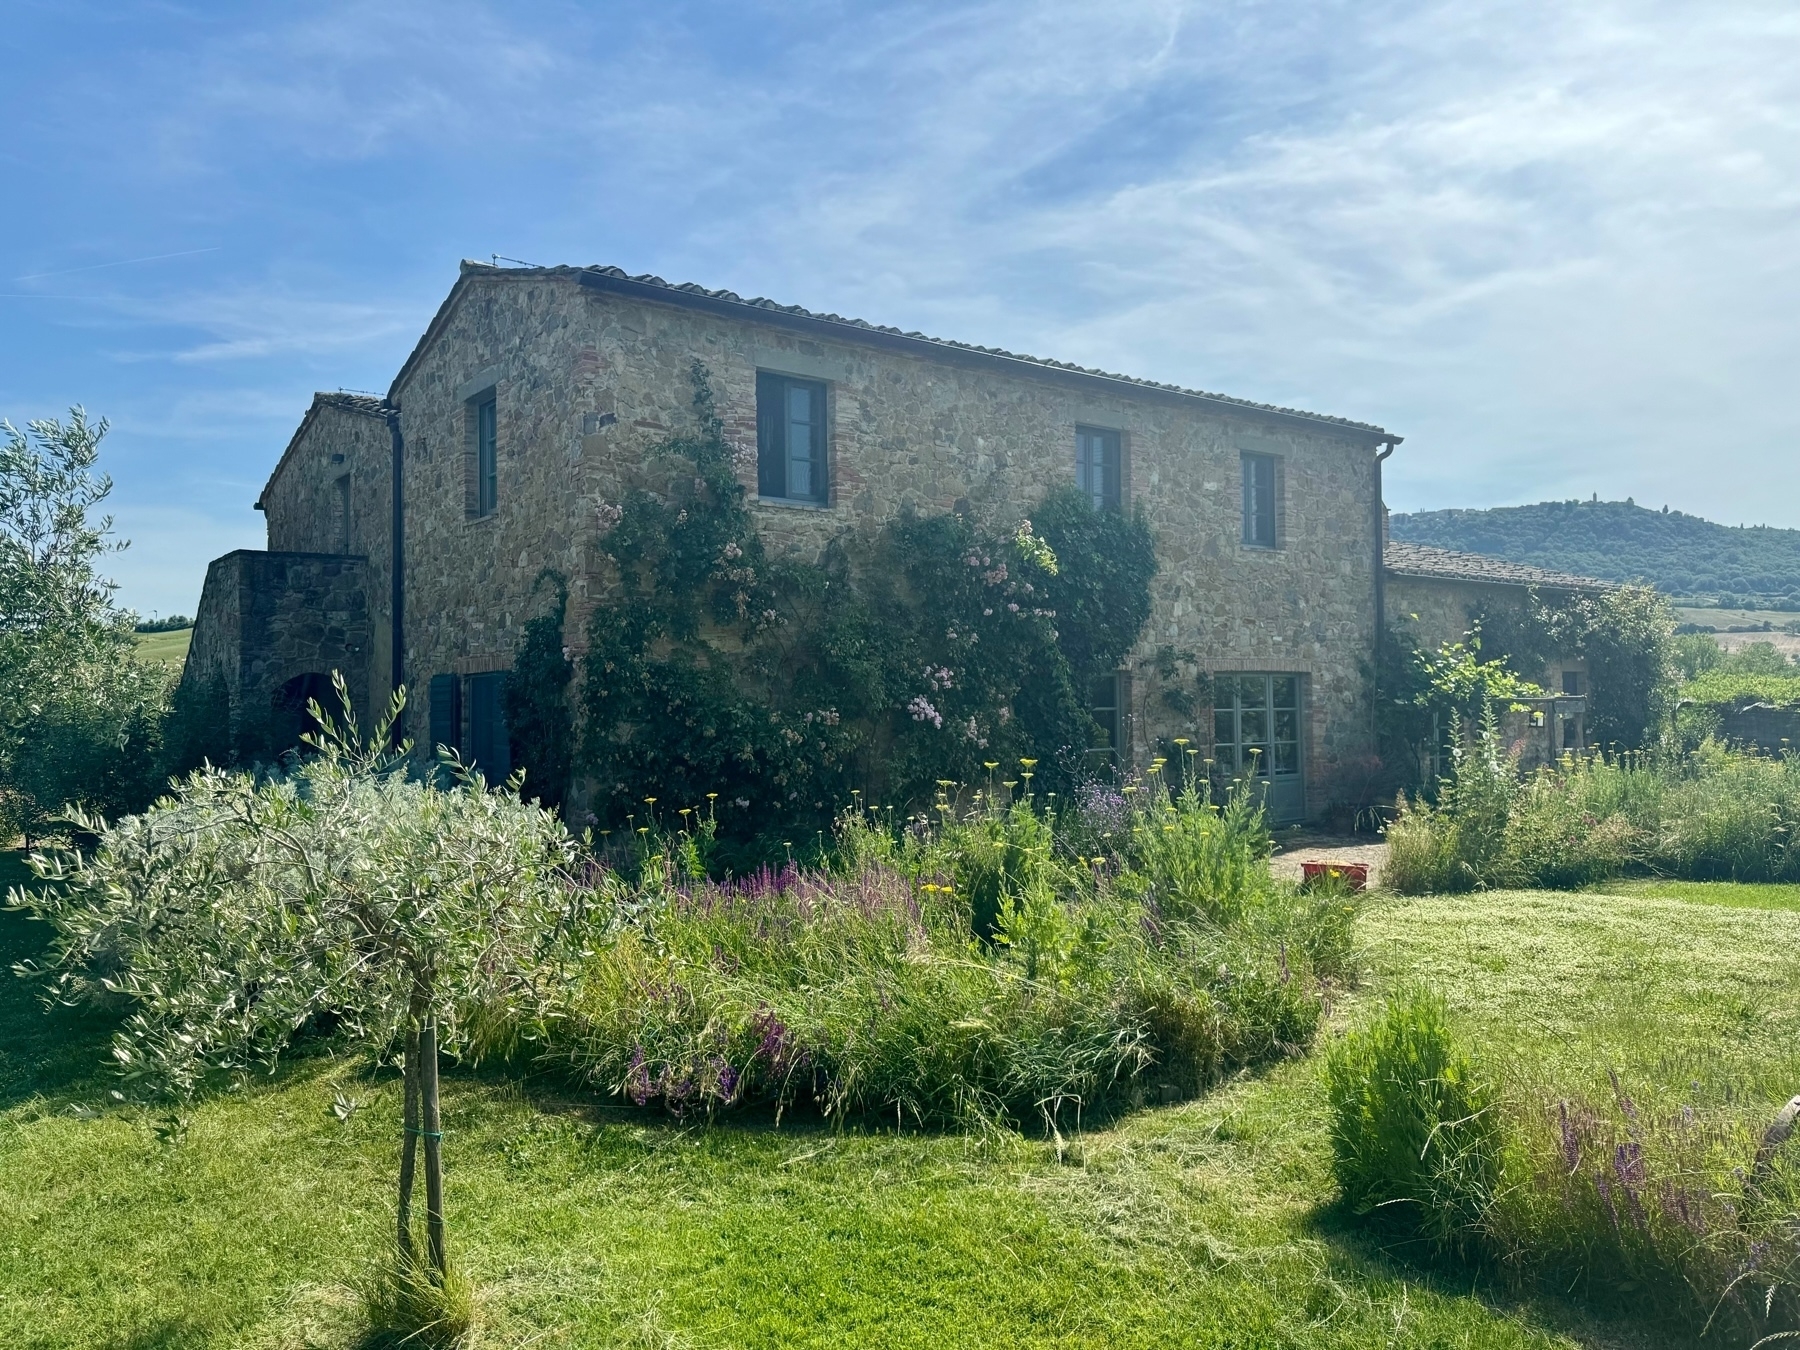 A rustic stone house surrounded by lush greenery and flowering plants, set against a backdrop of rolling hills and a clear blue sky.